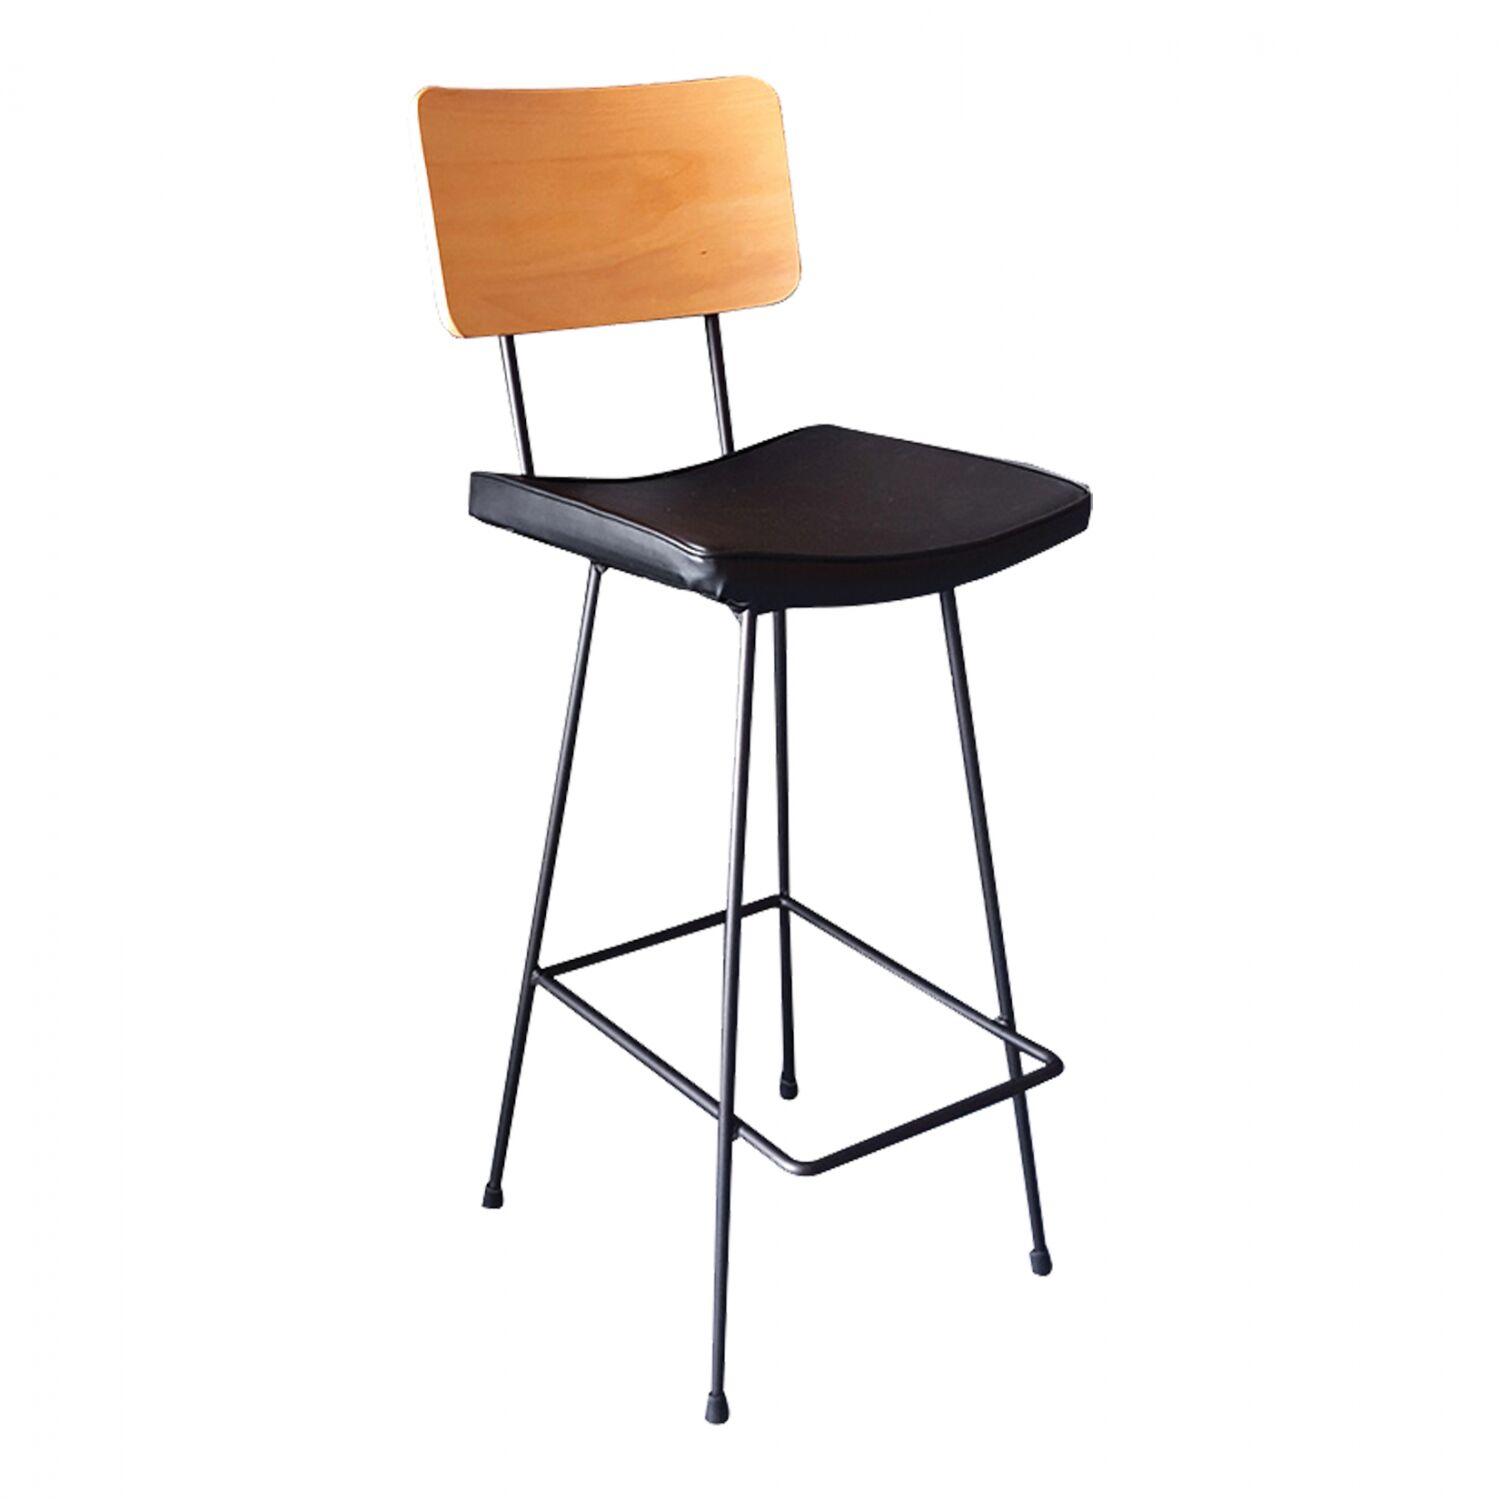 Metallic stool with wooden back with pillow TS366